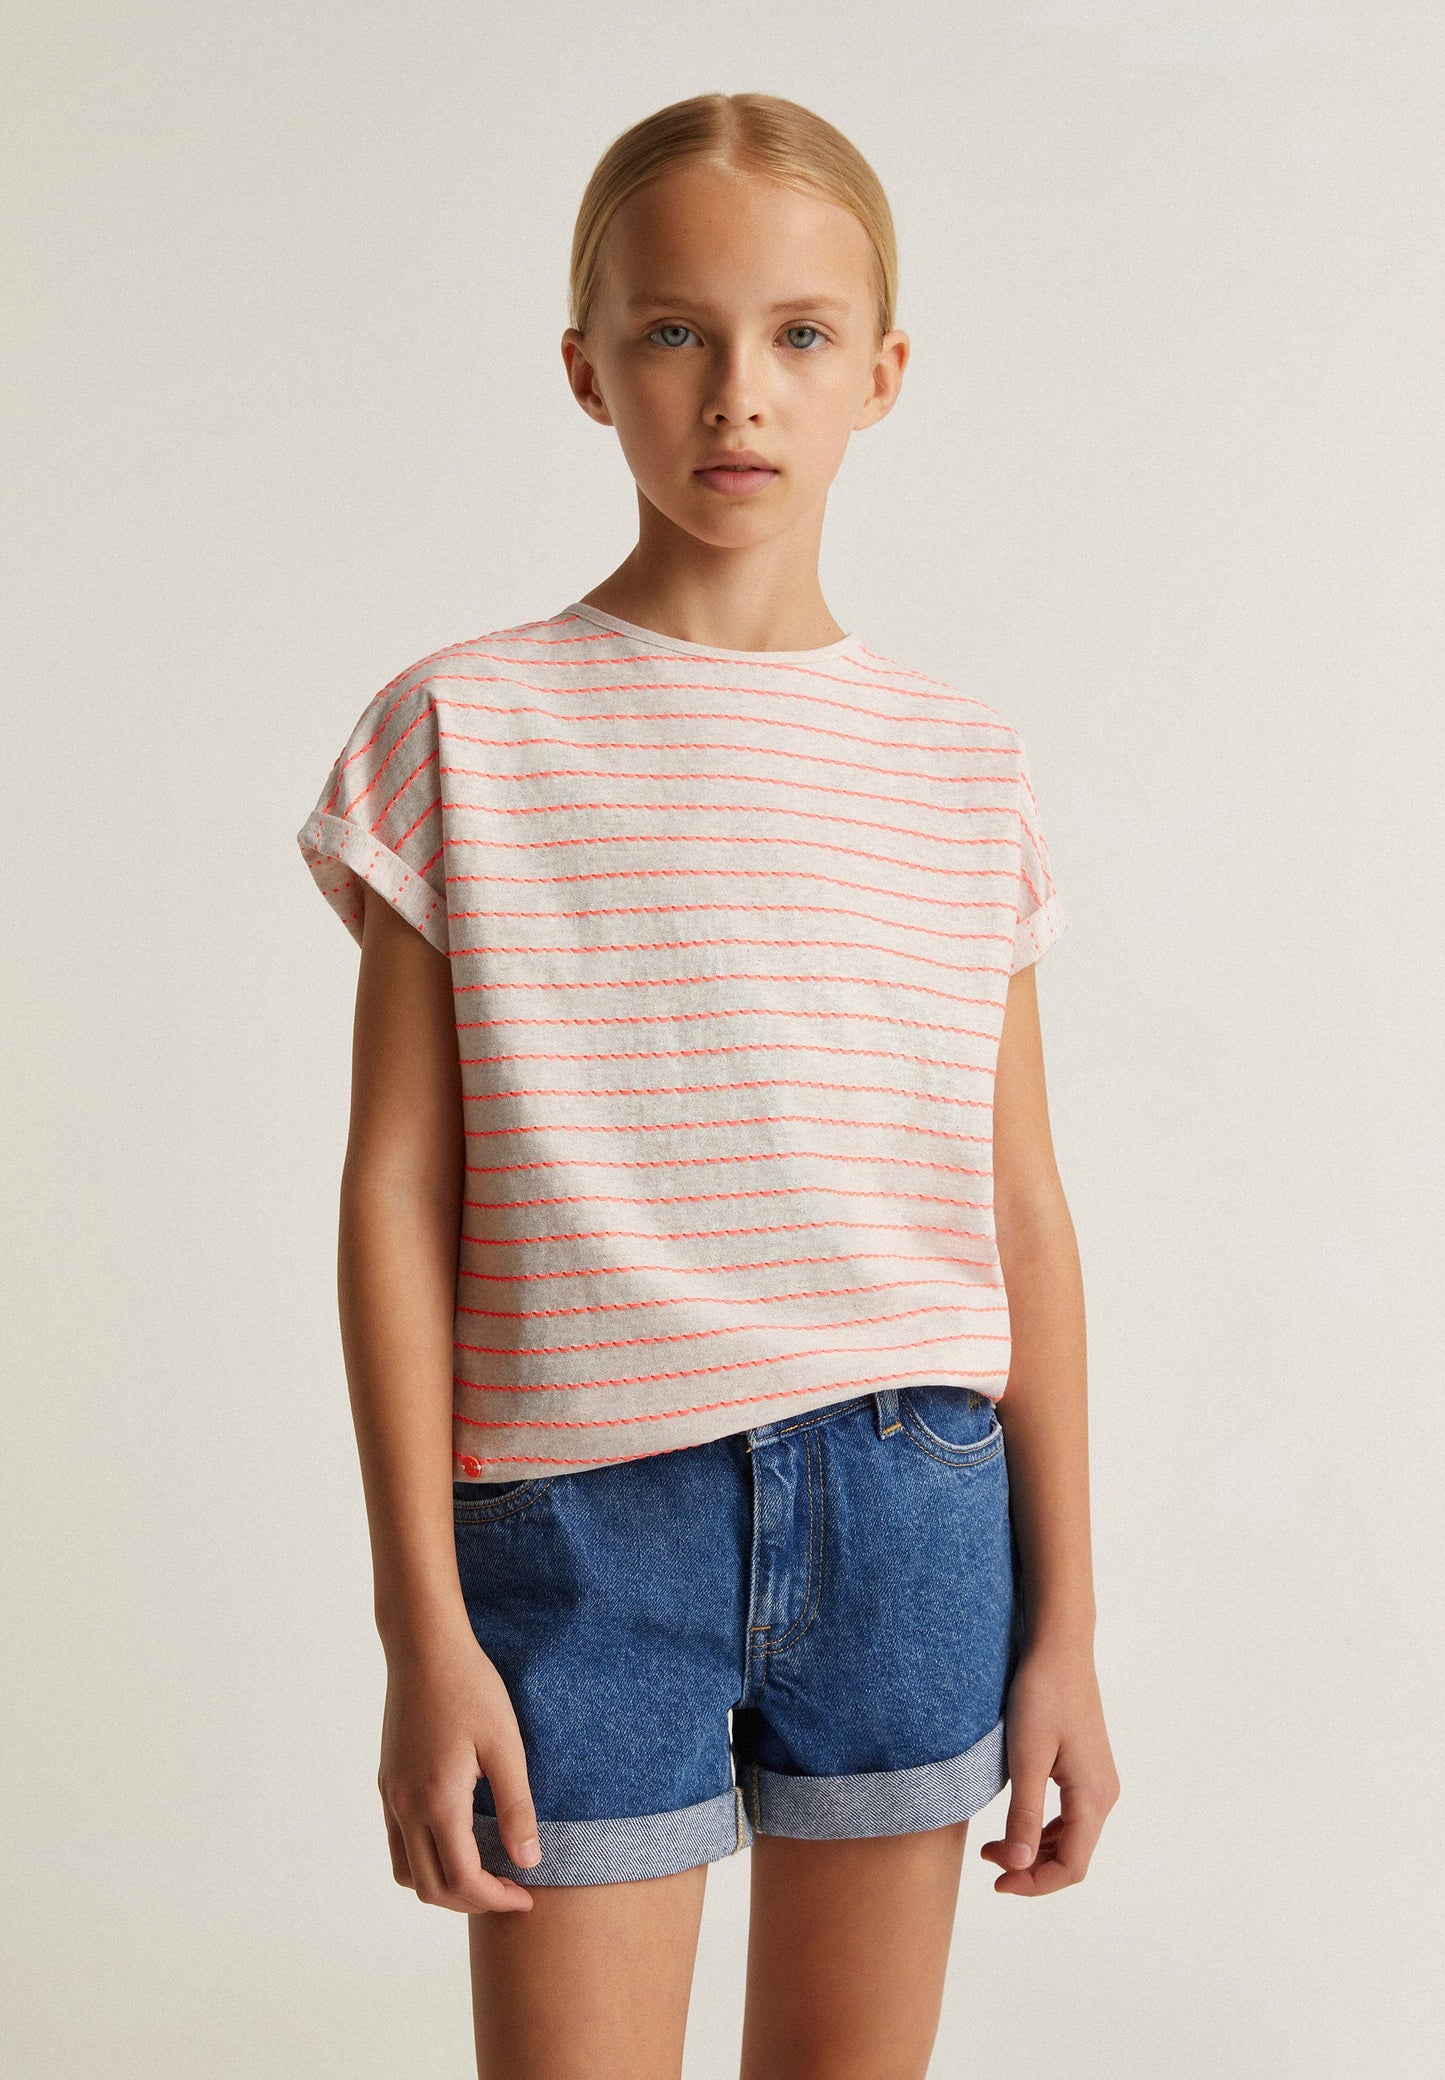 T-SHIRT WITH WOVEN NEON STRIPES